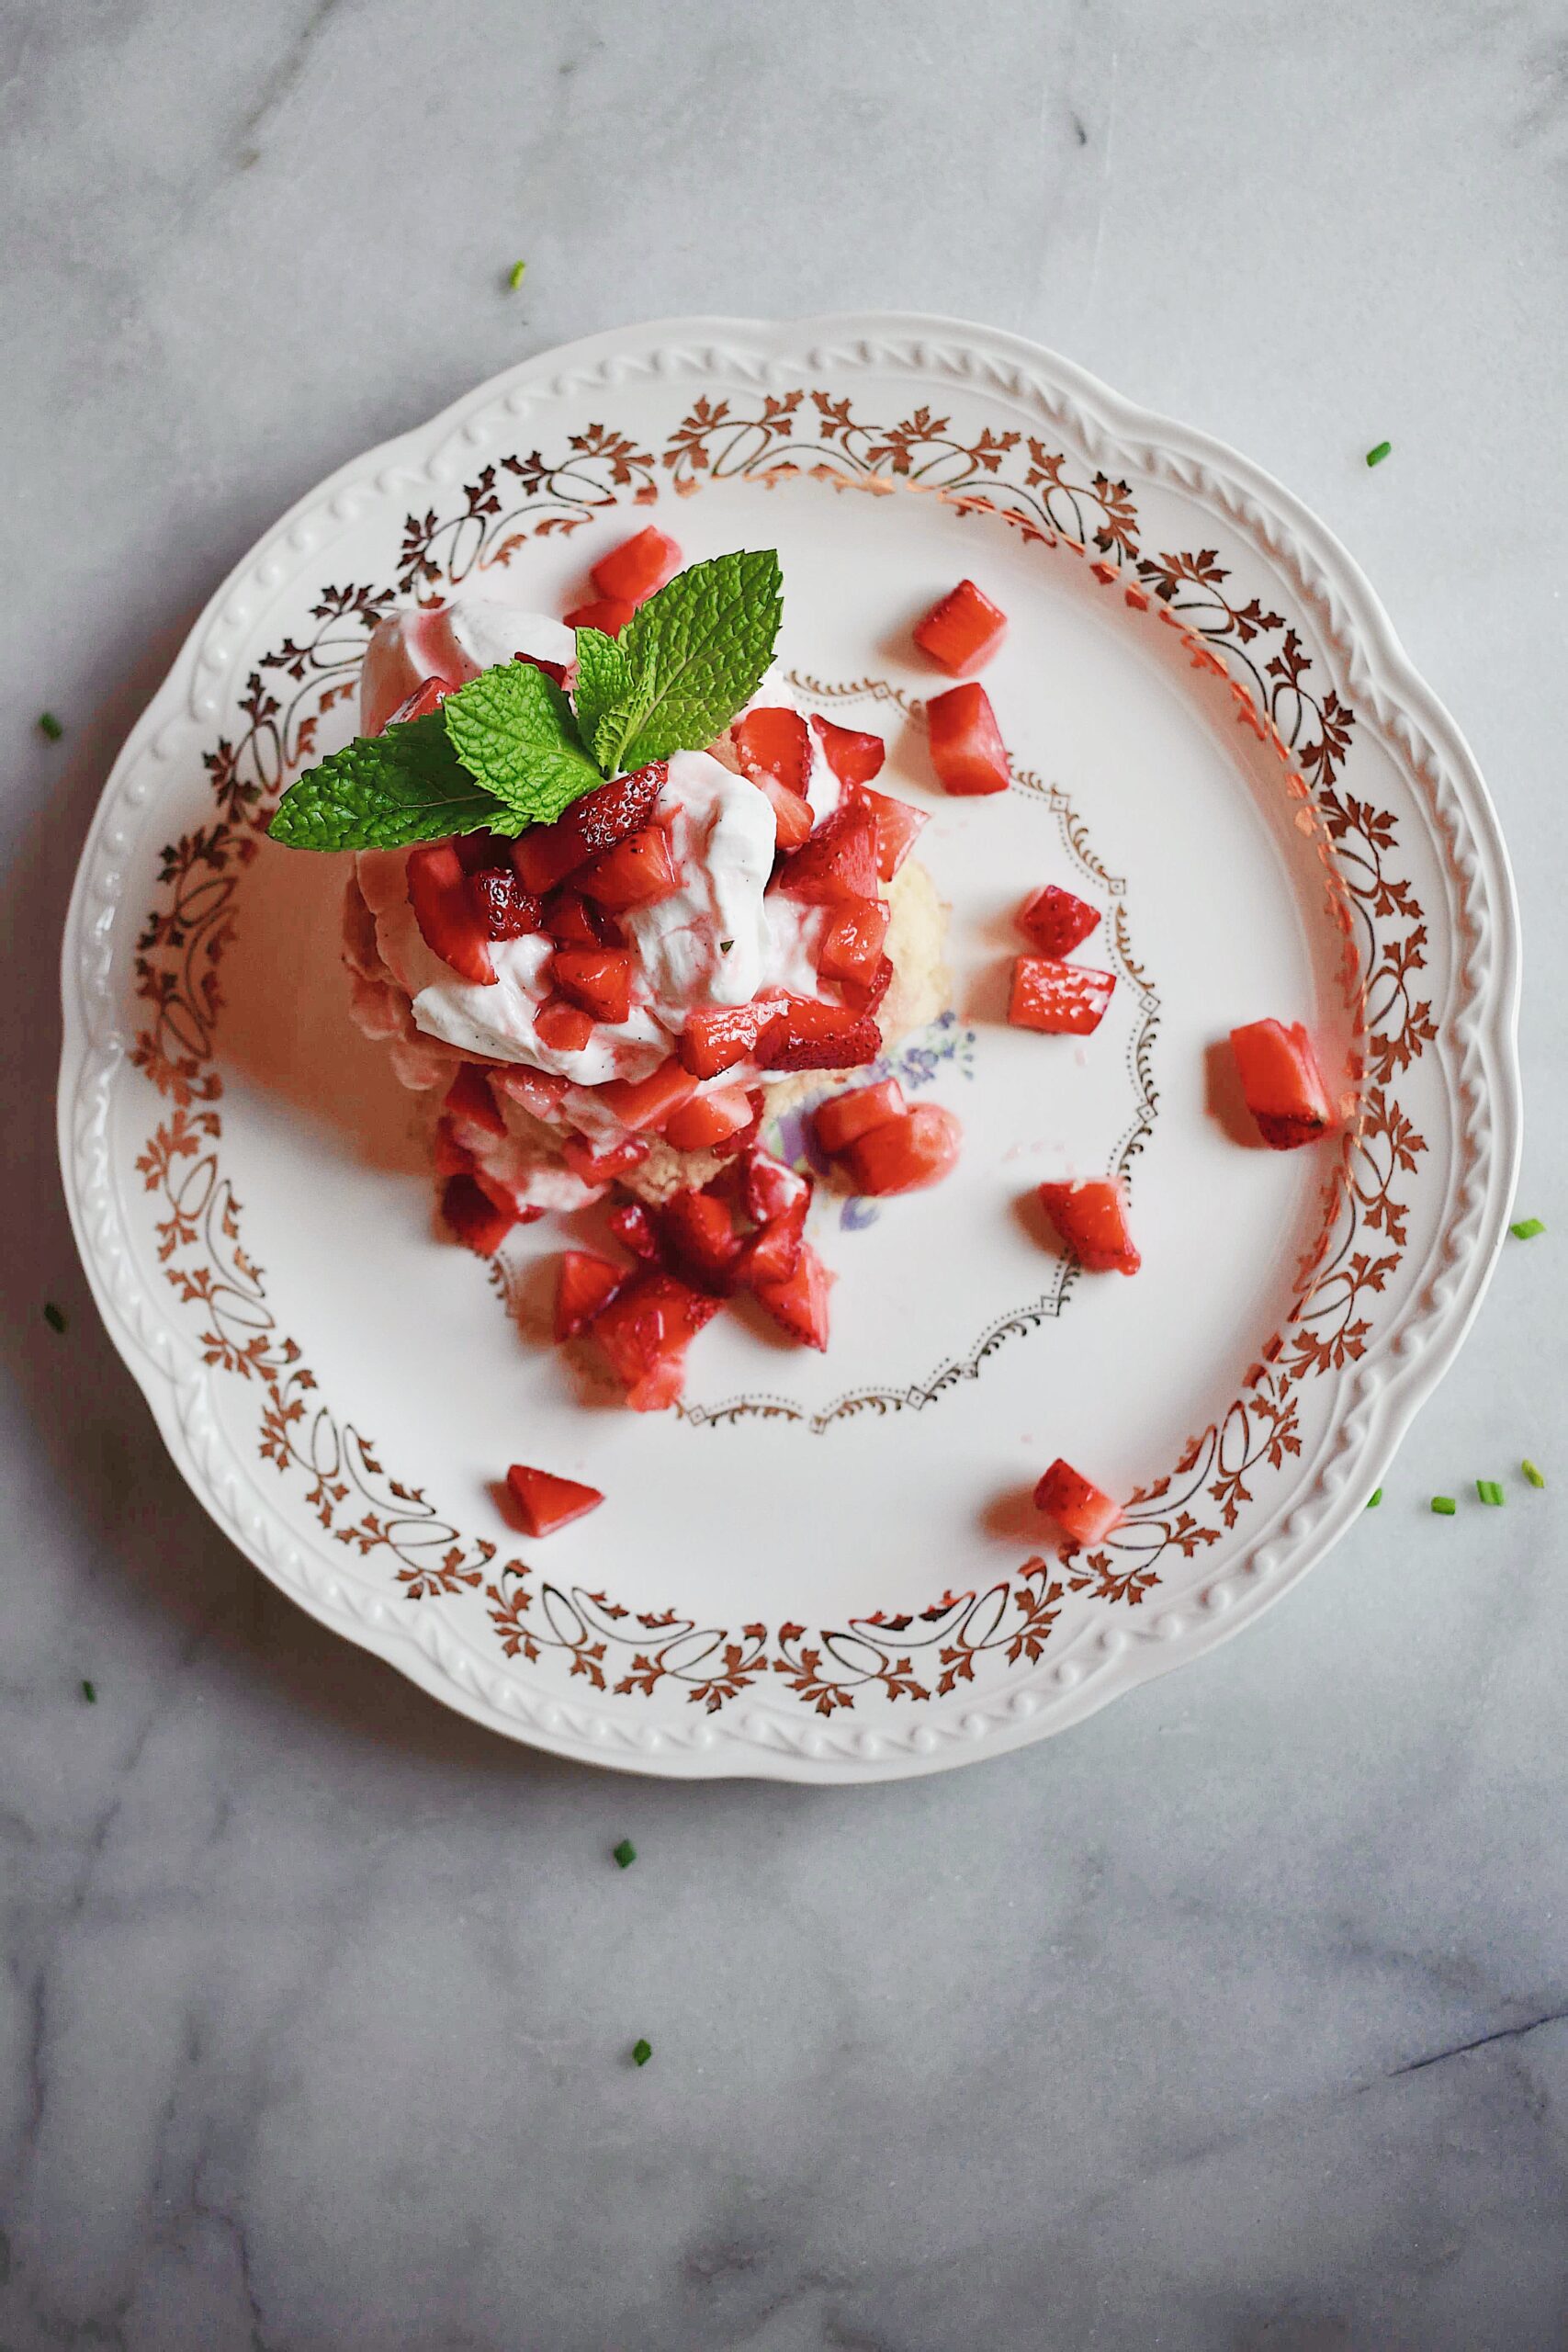 Joanna Gaines Strawberry Shortcake and Homemade Whipped Cream from the Magnolia Table Cookbook